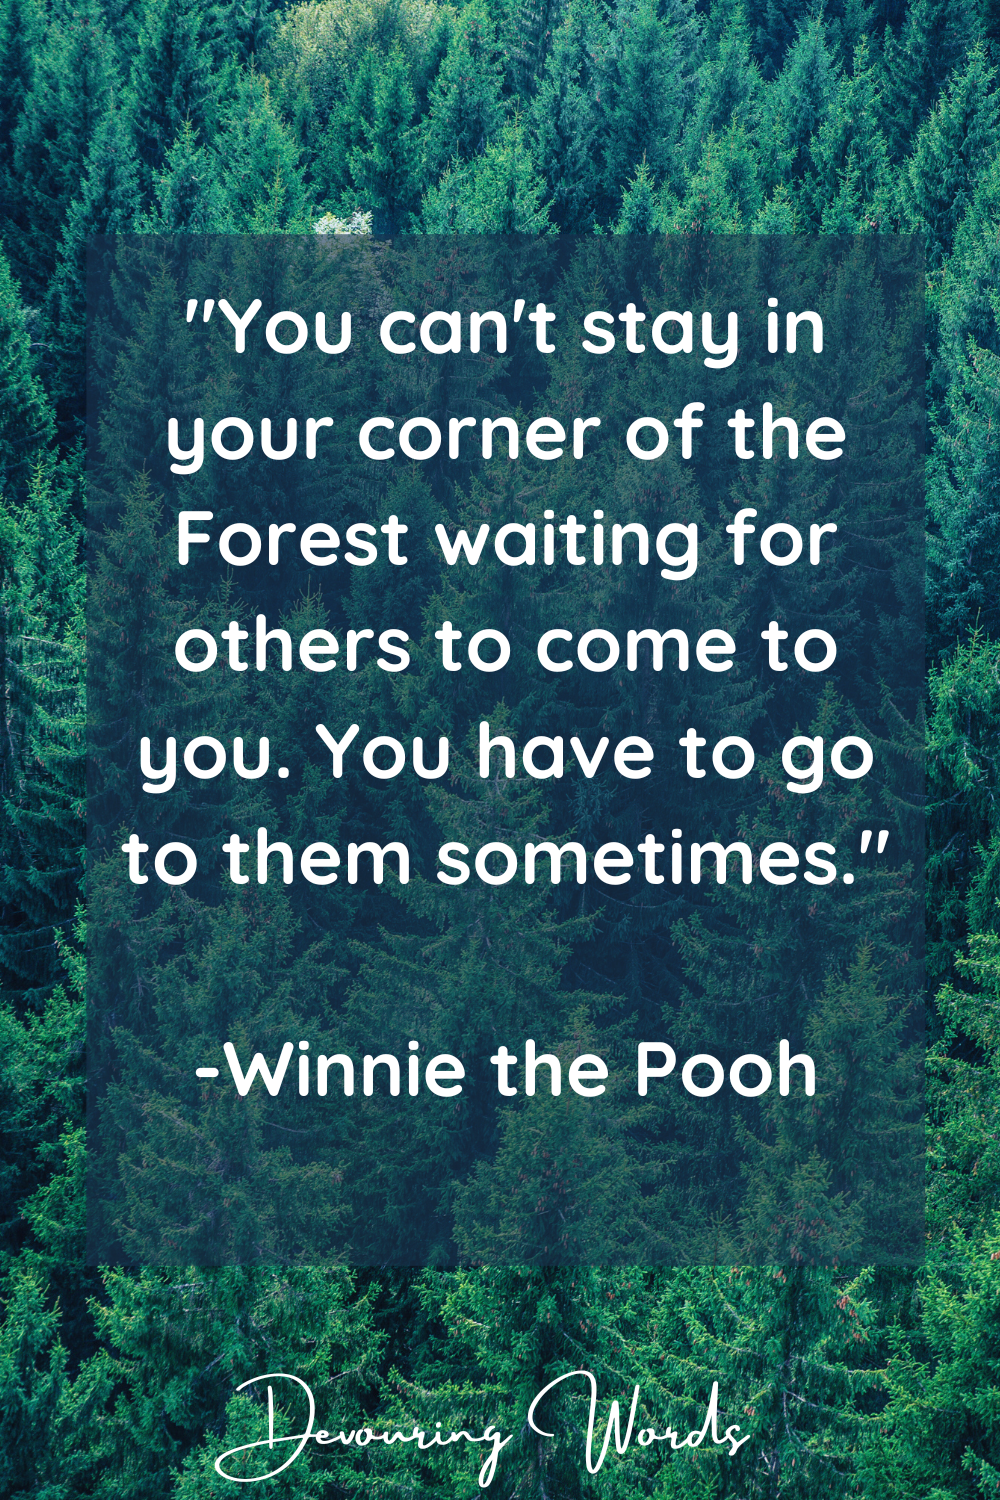 Winnie the Pooh quotes about life